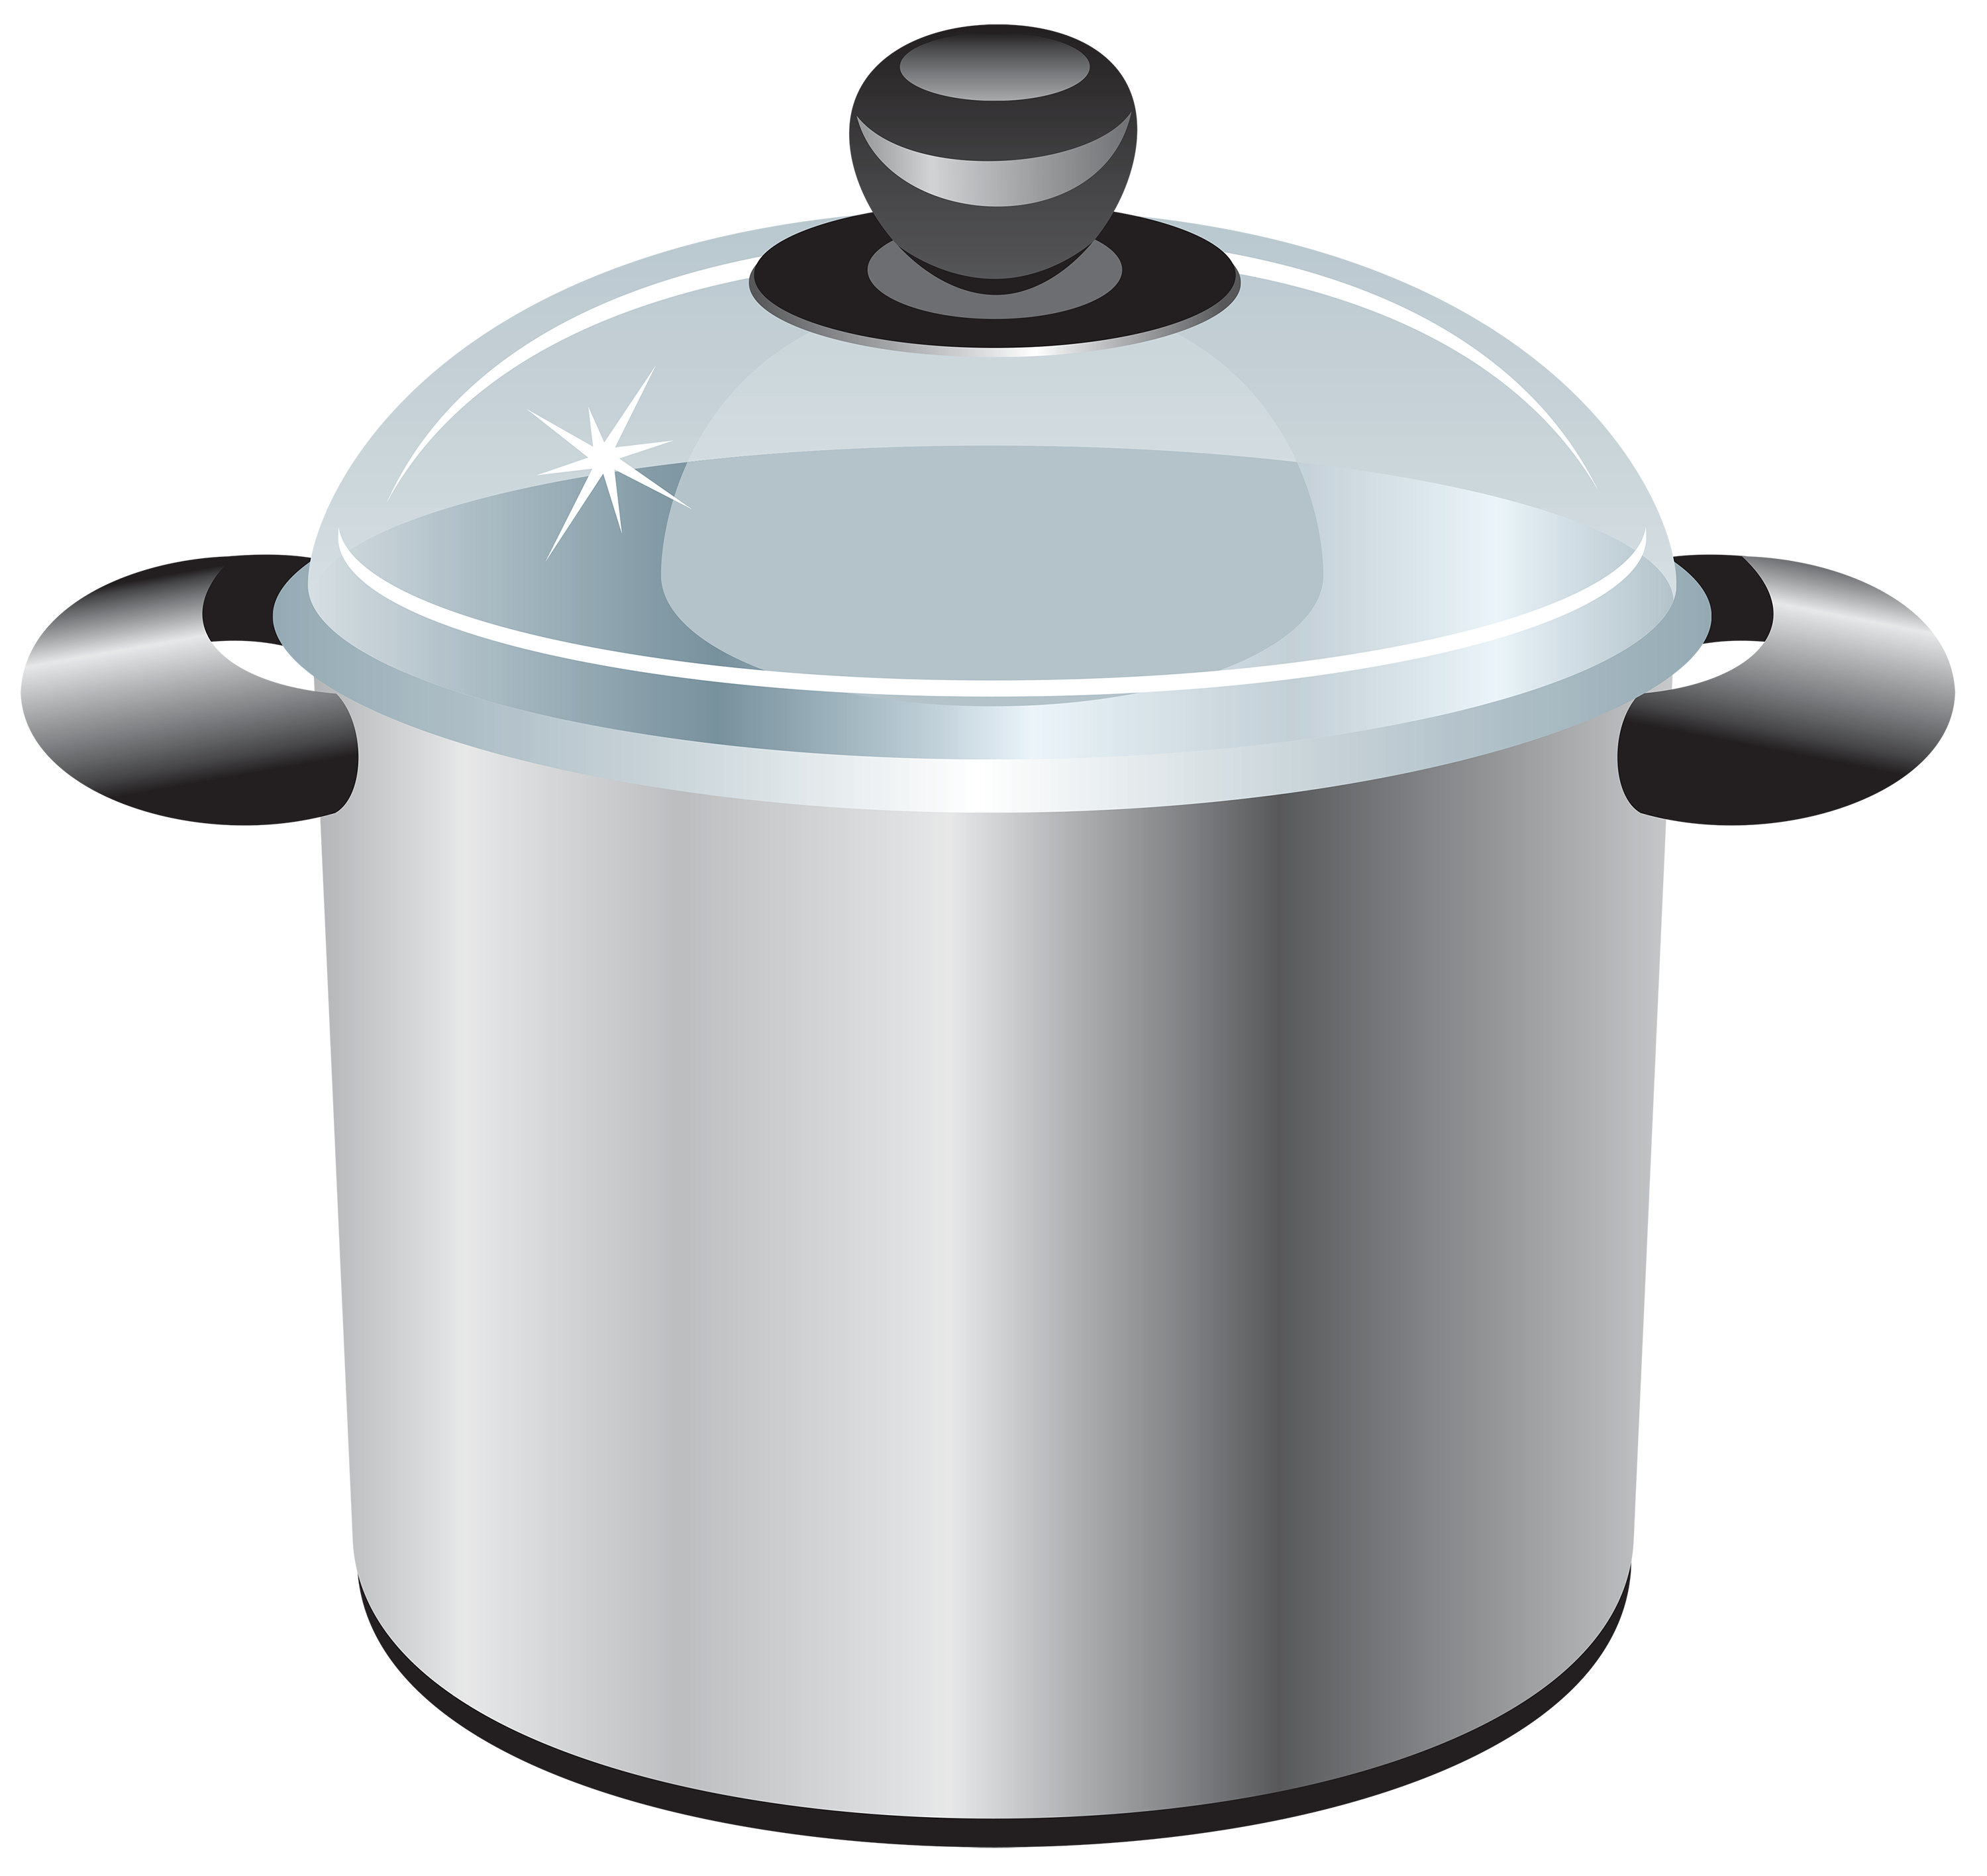 Silver cooking pot clipart web